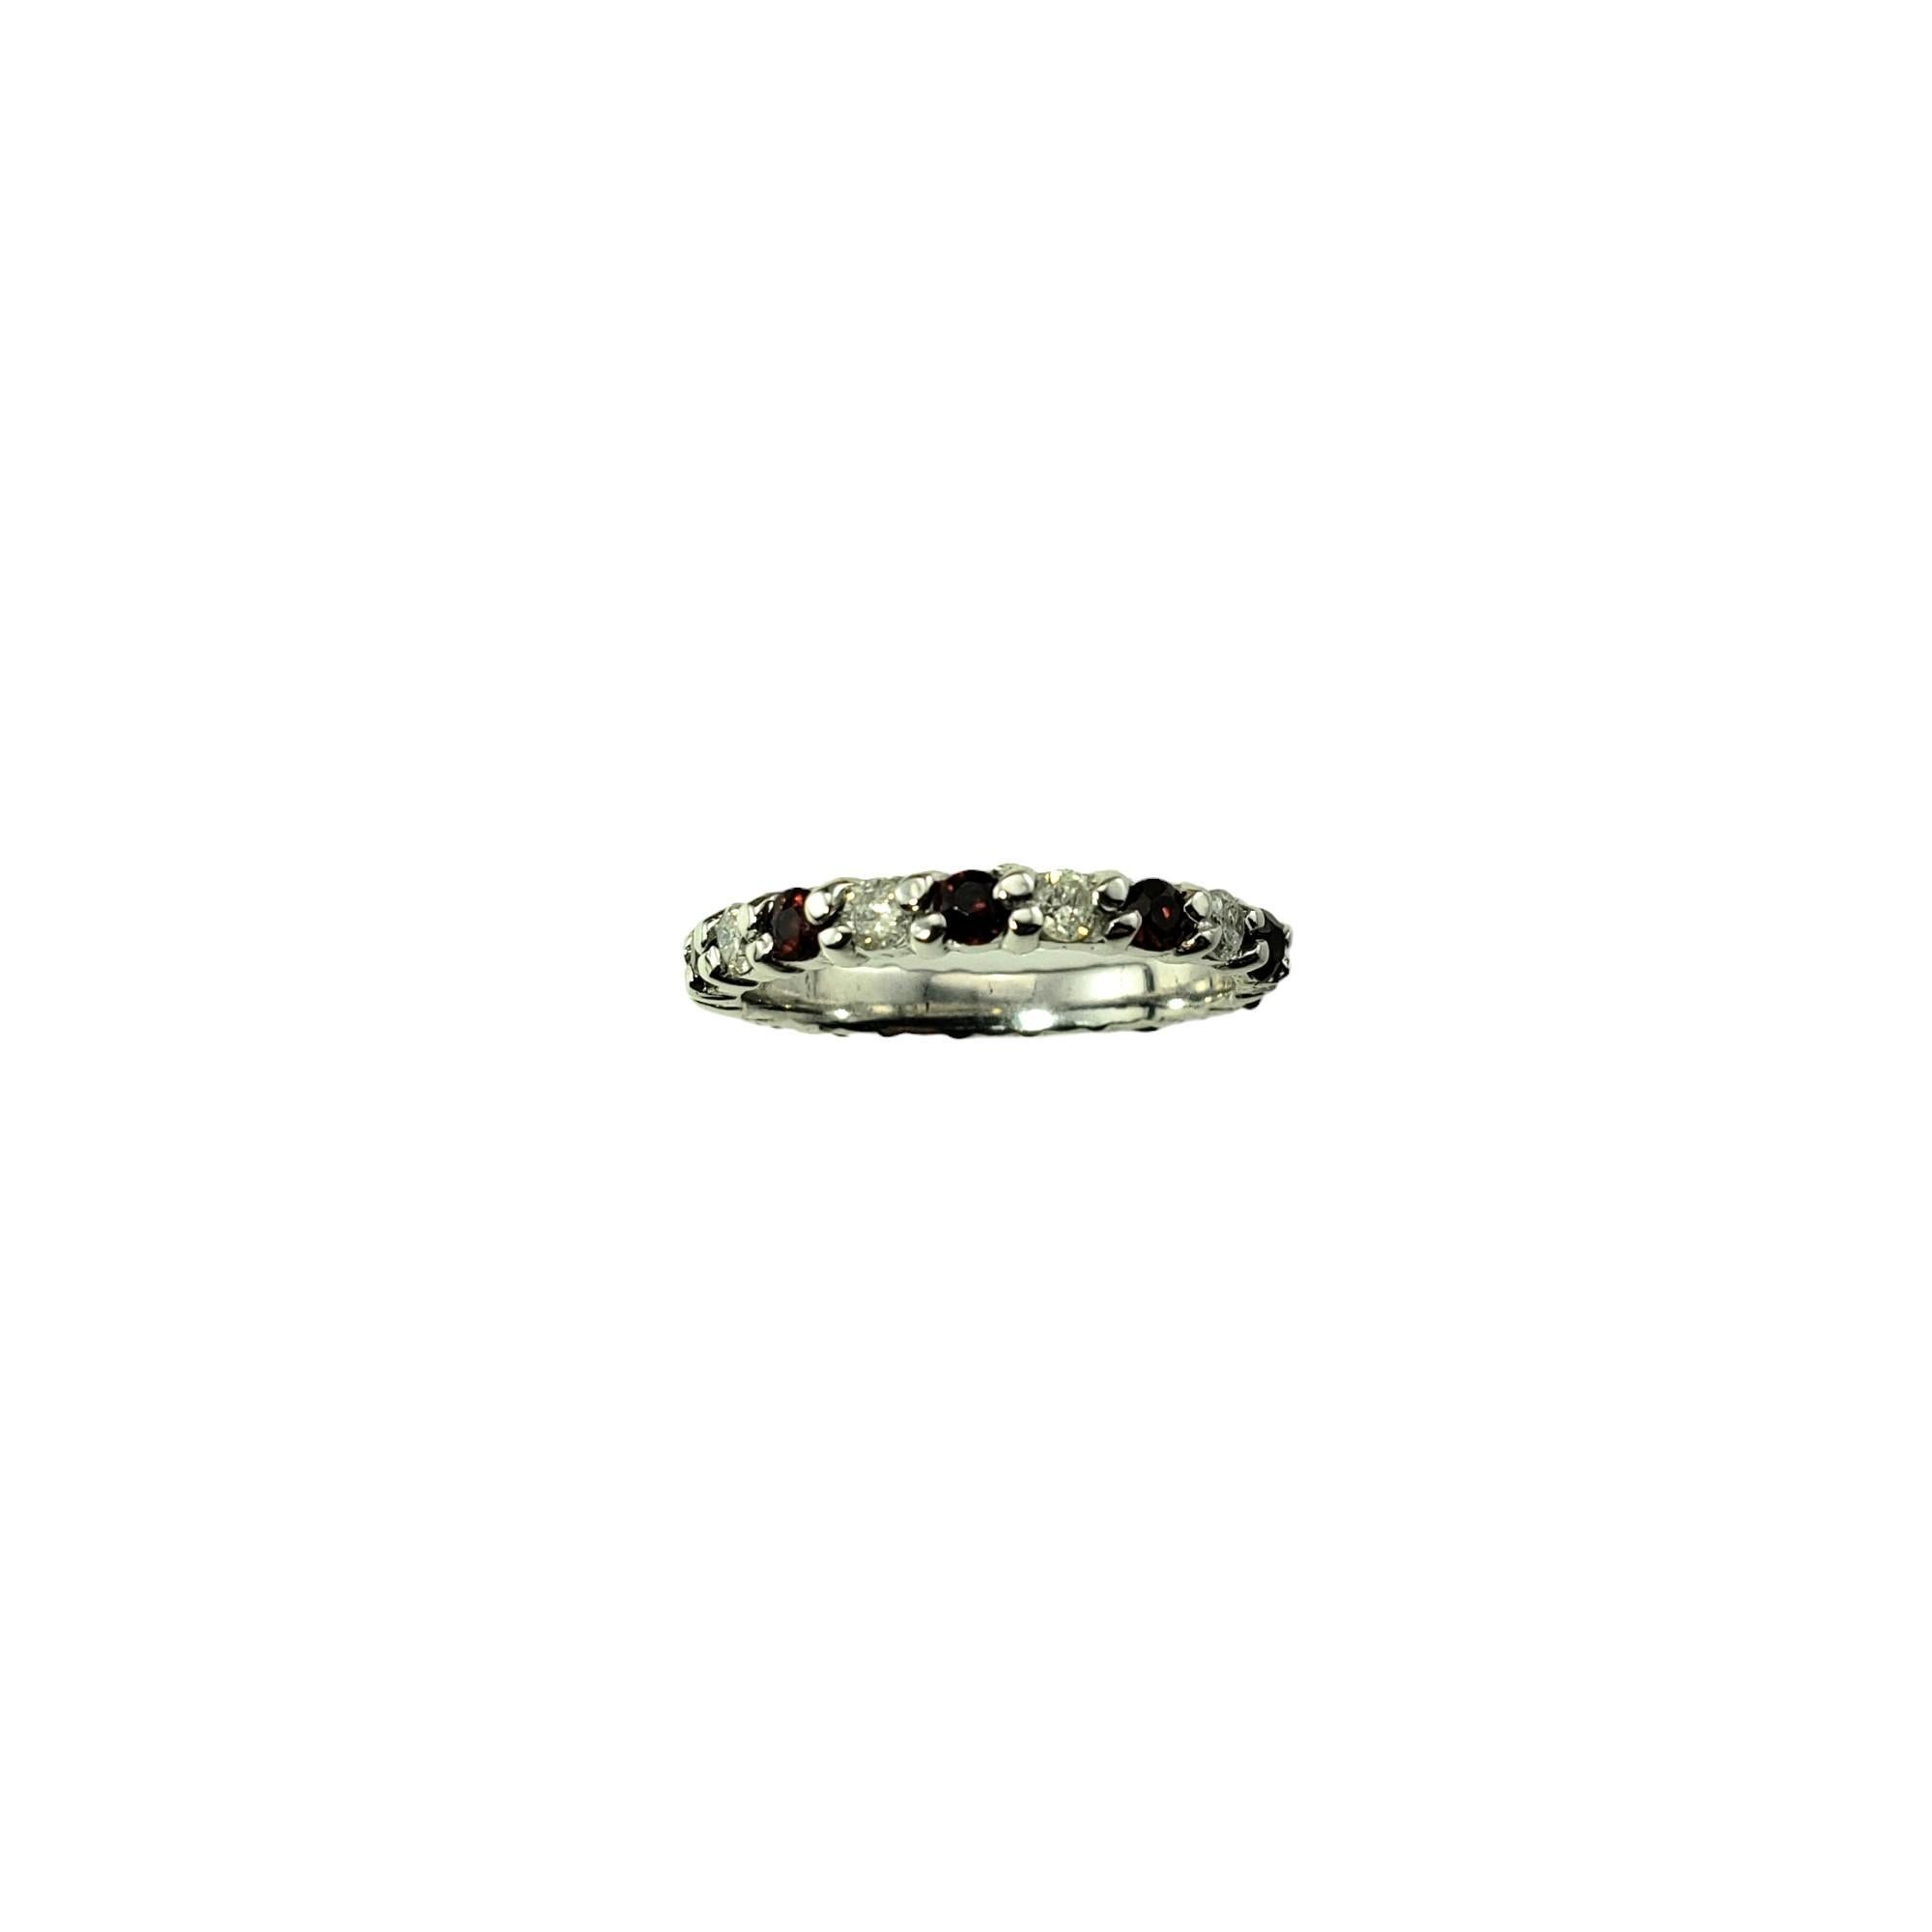 Vintage 14 Karat White Gold Garnet and Diamond Eternity Band Ring Size 6.25 JAGi Certified-

This lovely eternity band features ten round garnets and ten round brilliant cut diamonds set in classic 14K white gold.  Width: 3 mm.

Total garnet weight: